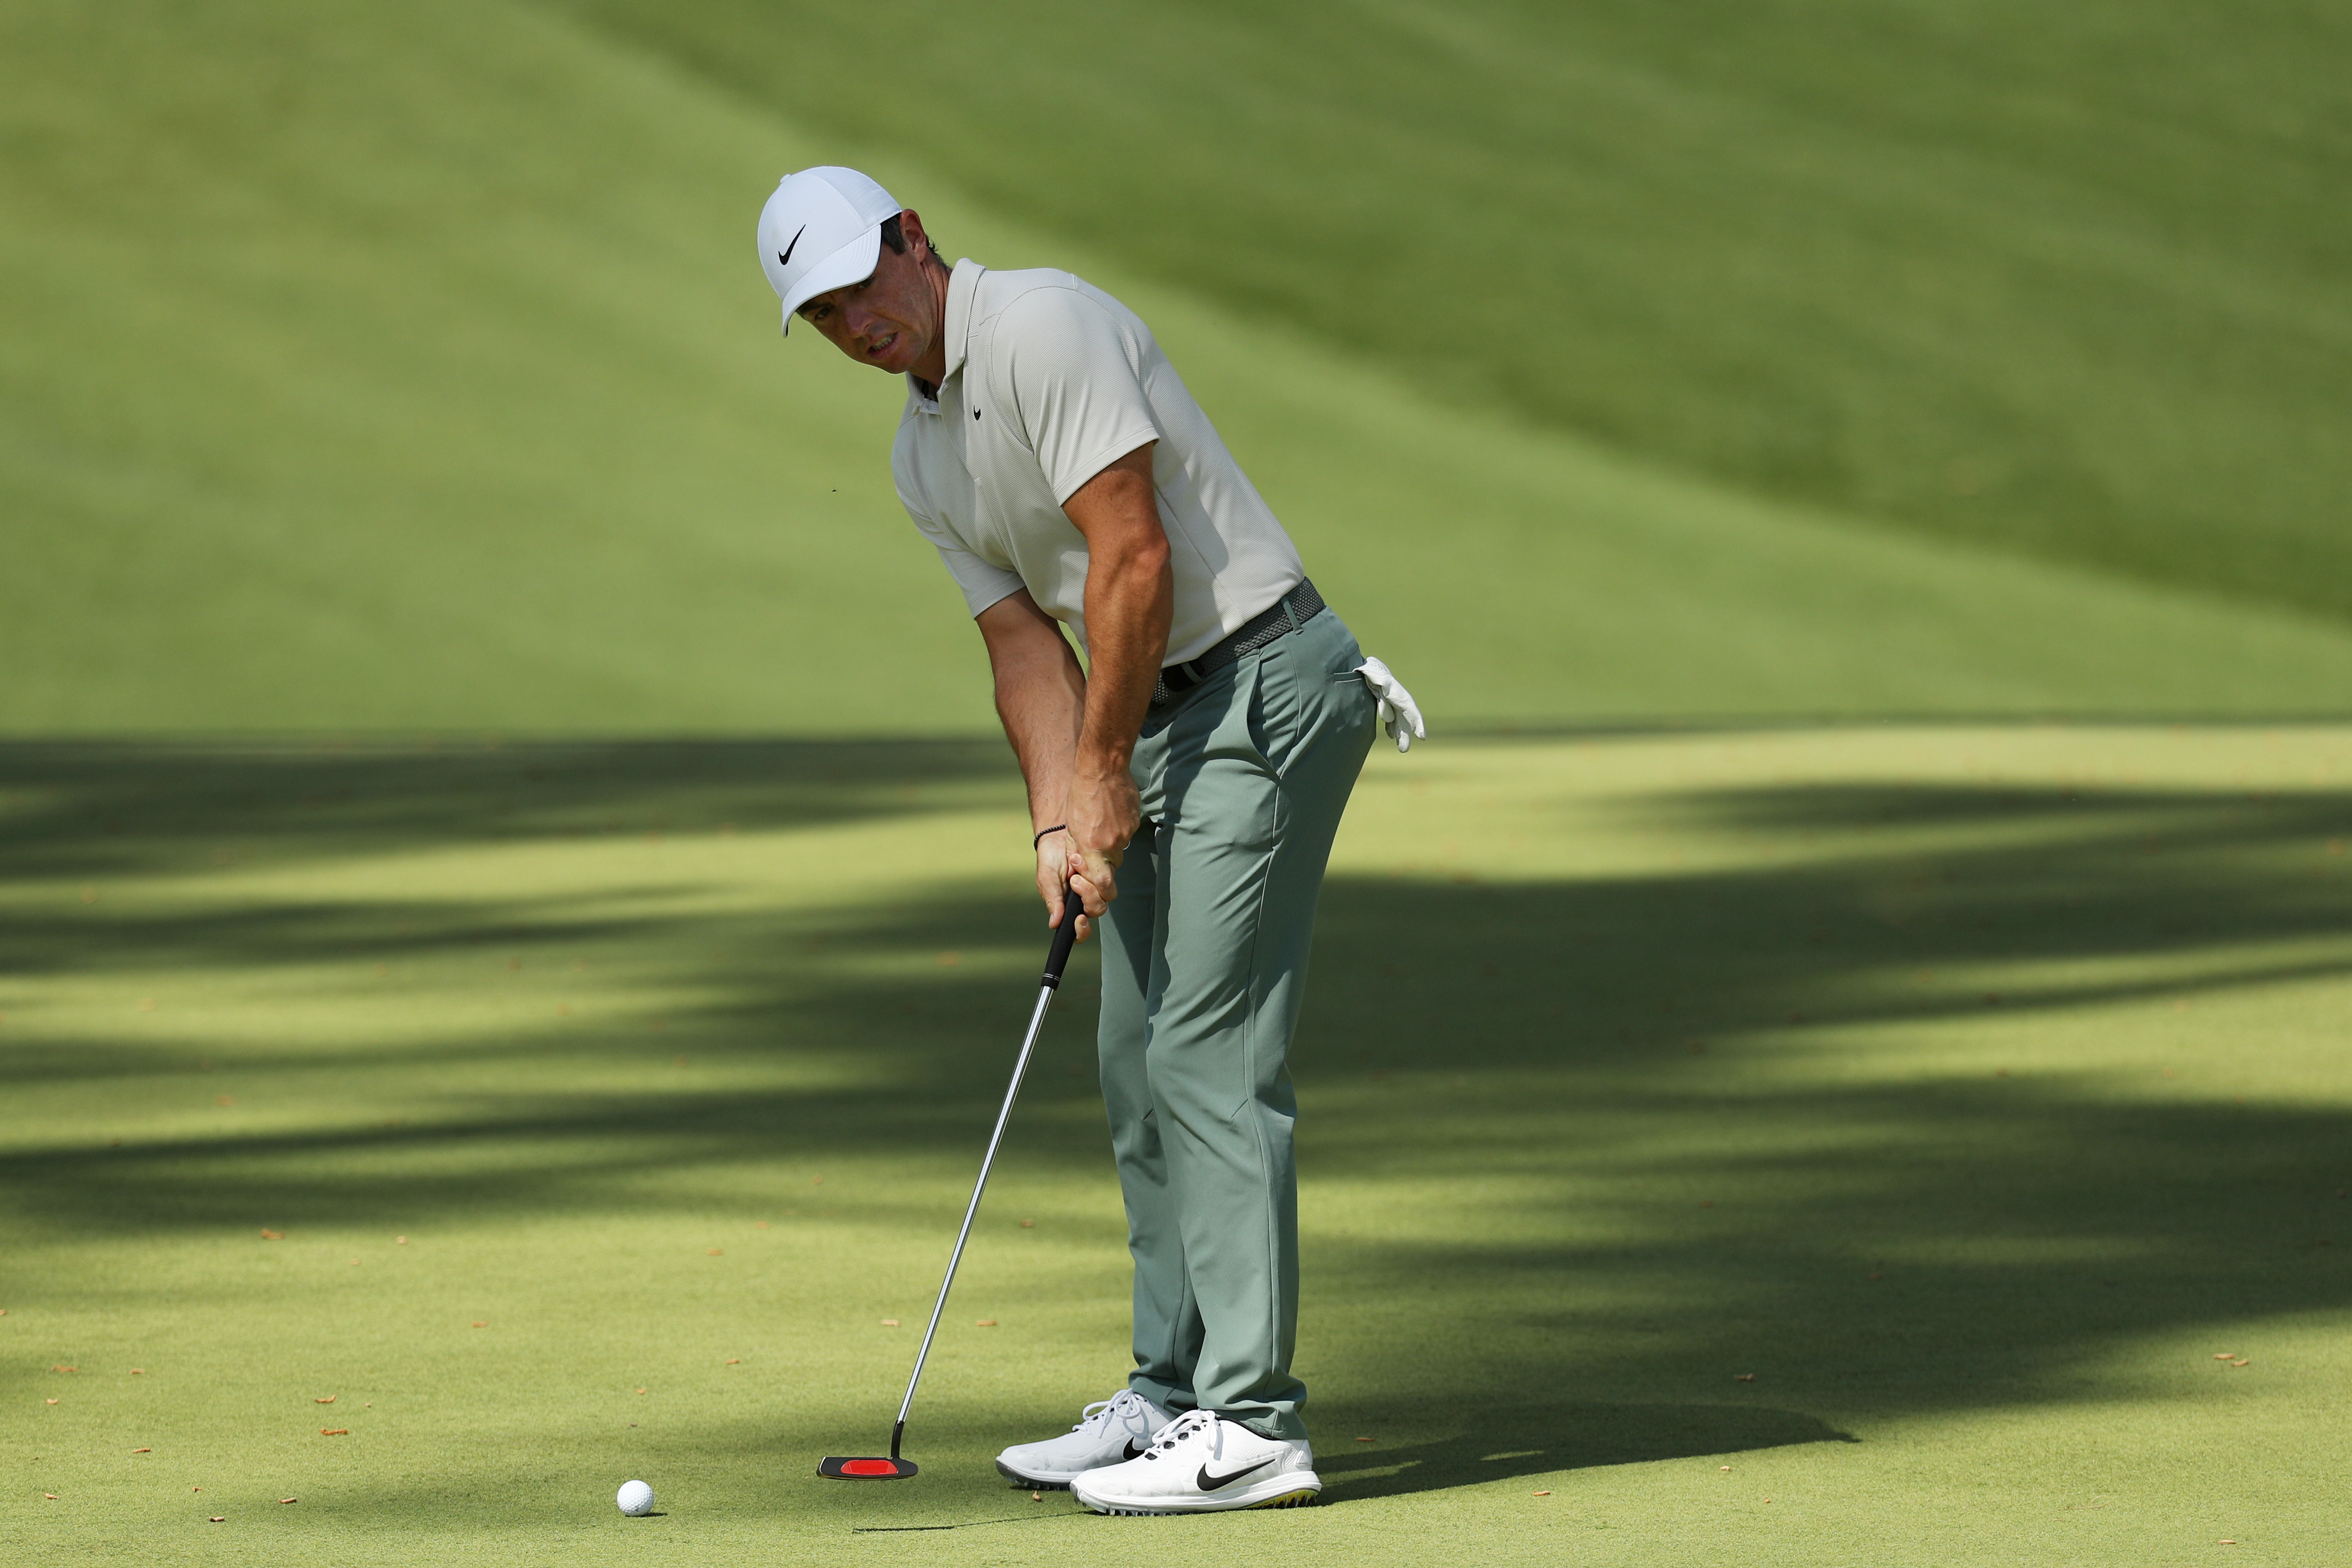 Golf putting coach tells GM: Rory McIlroy's tempo looks better than ever